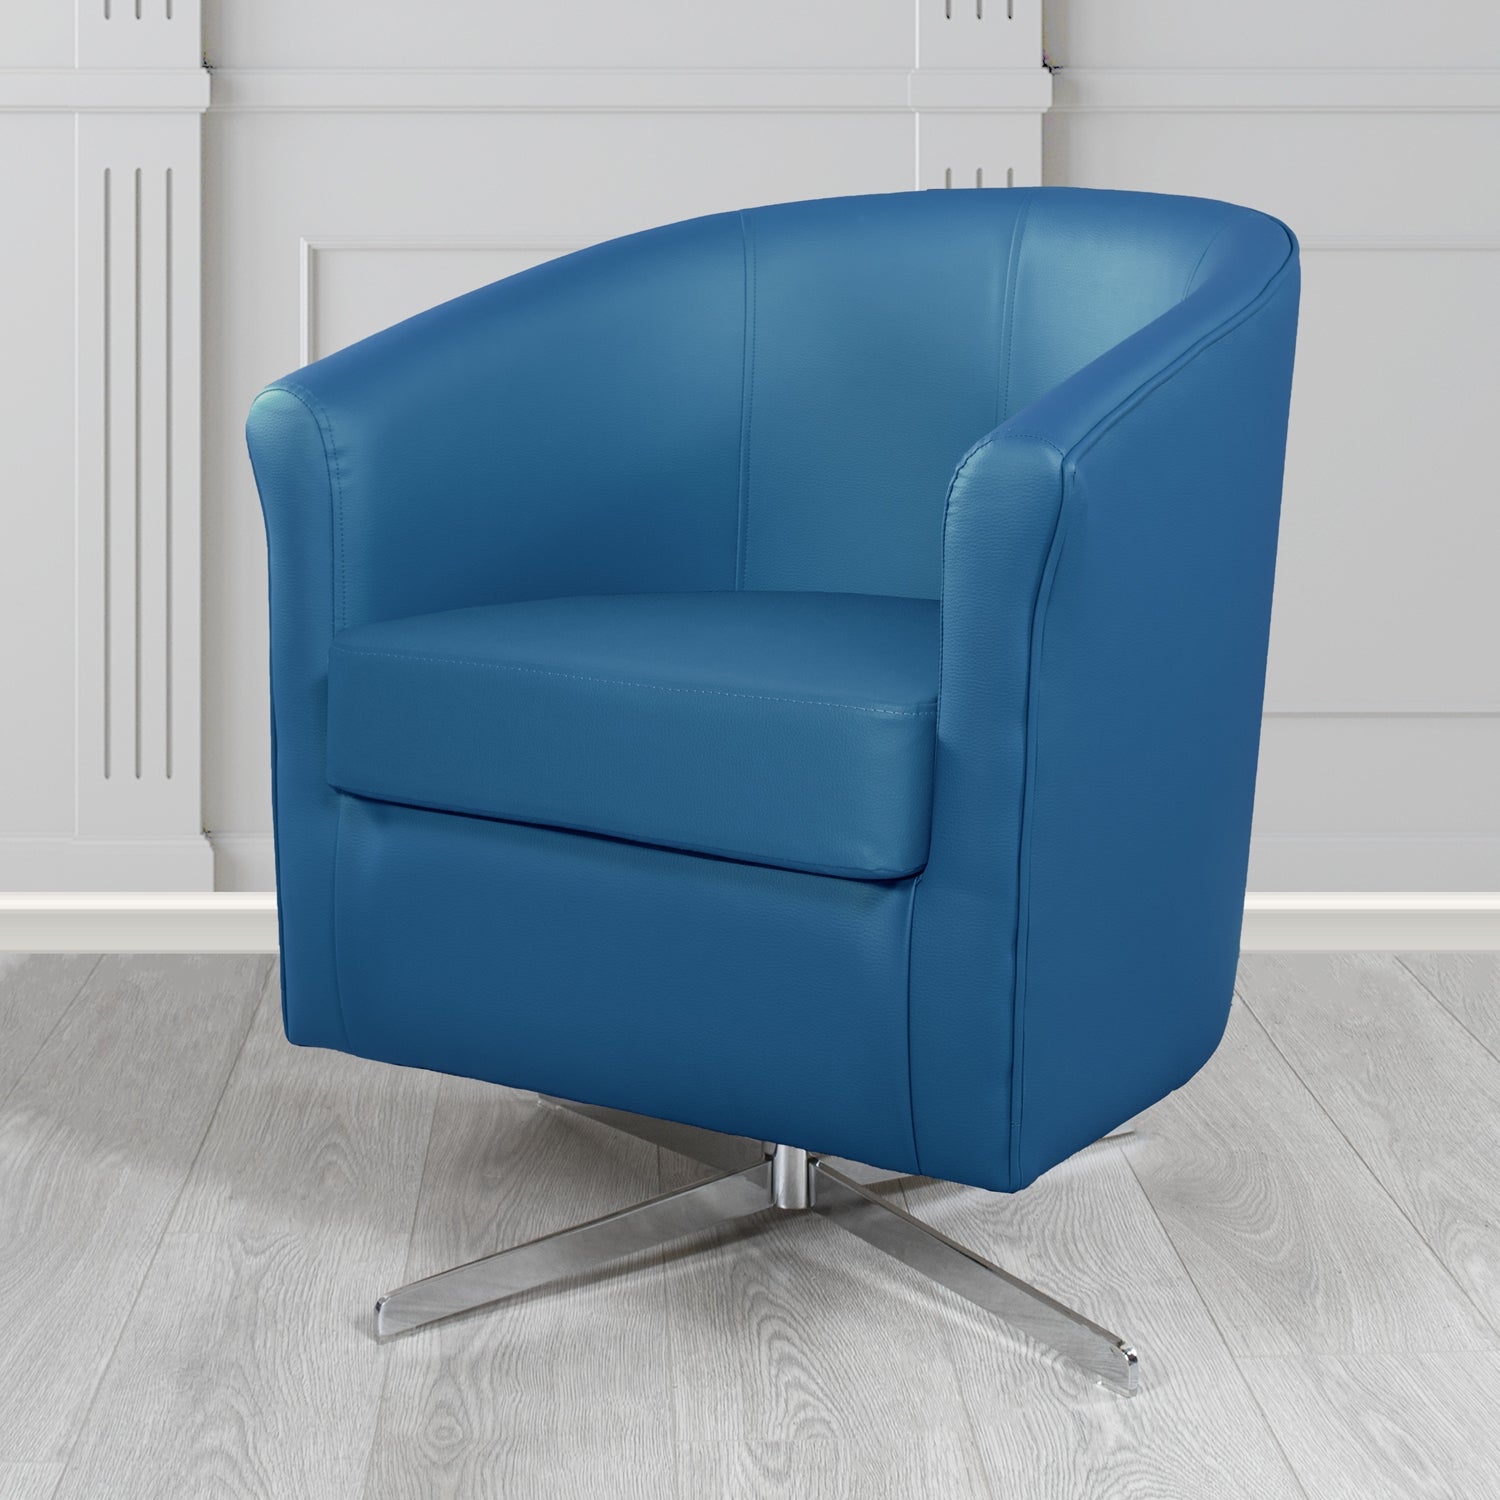 Cannes Swivel Tub Chair in Madrid Royal Faux Leather - The Tub Chair Shop